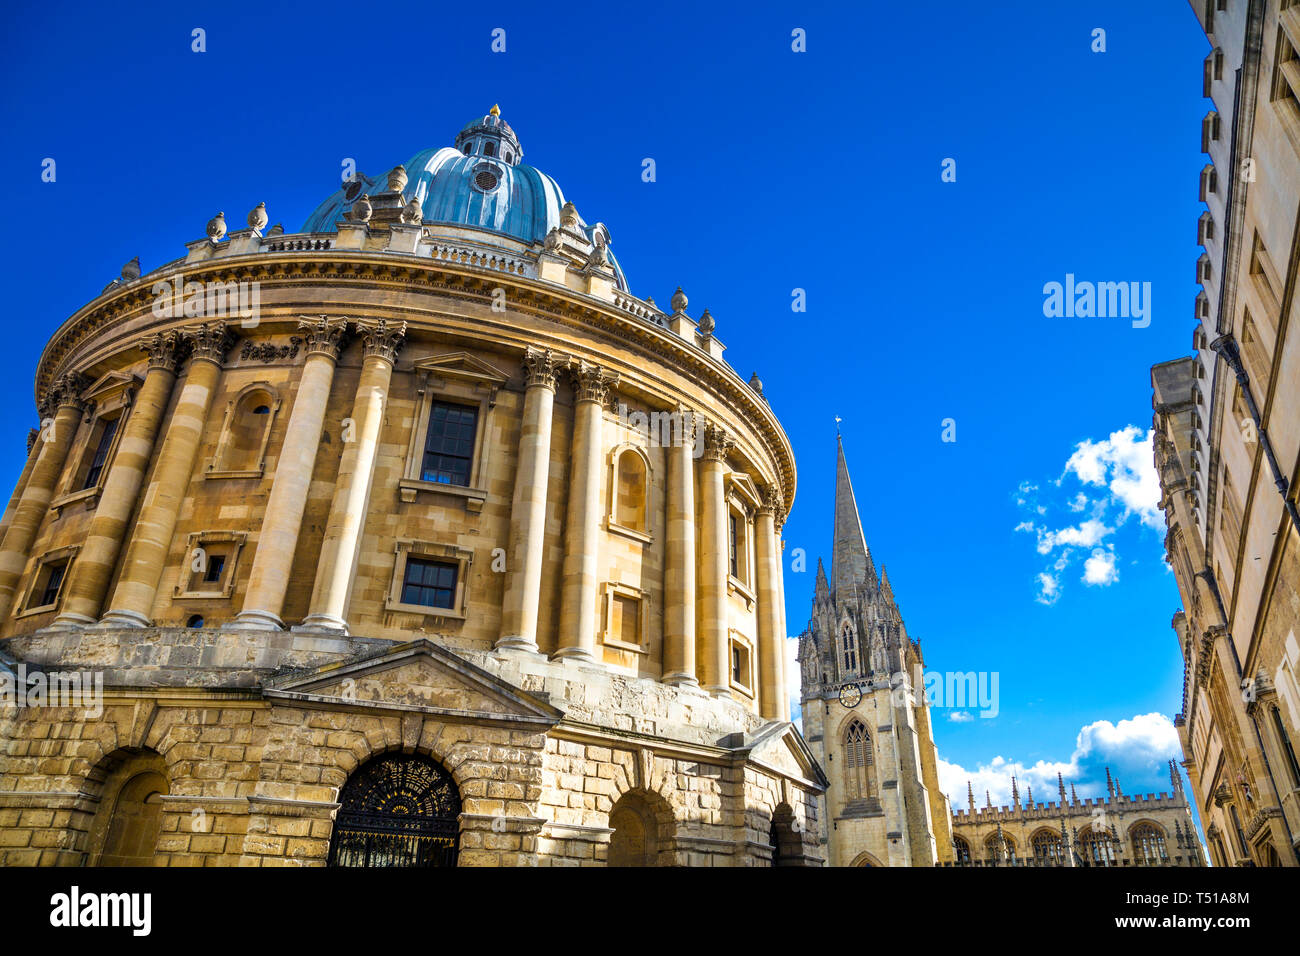 The Radcliffe Camera building facade, part of the Oxford University, in Oxford, UK Stock Photo